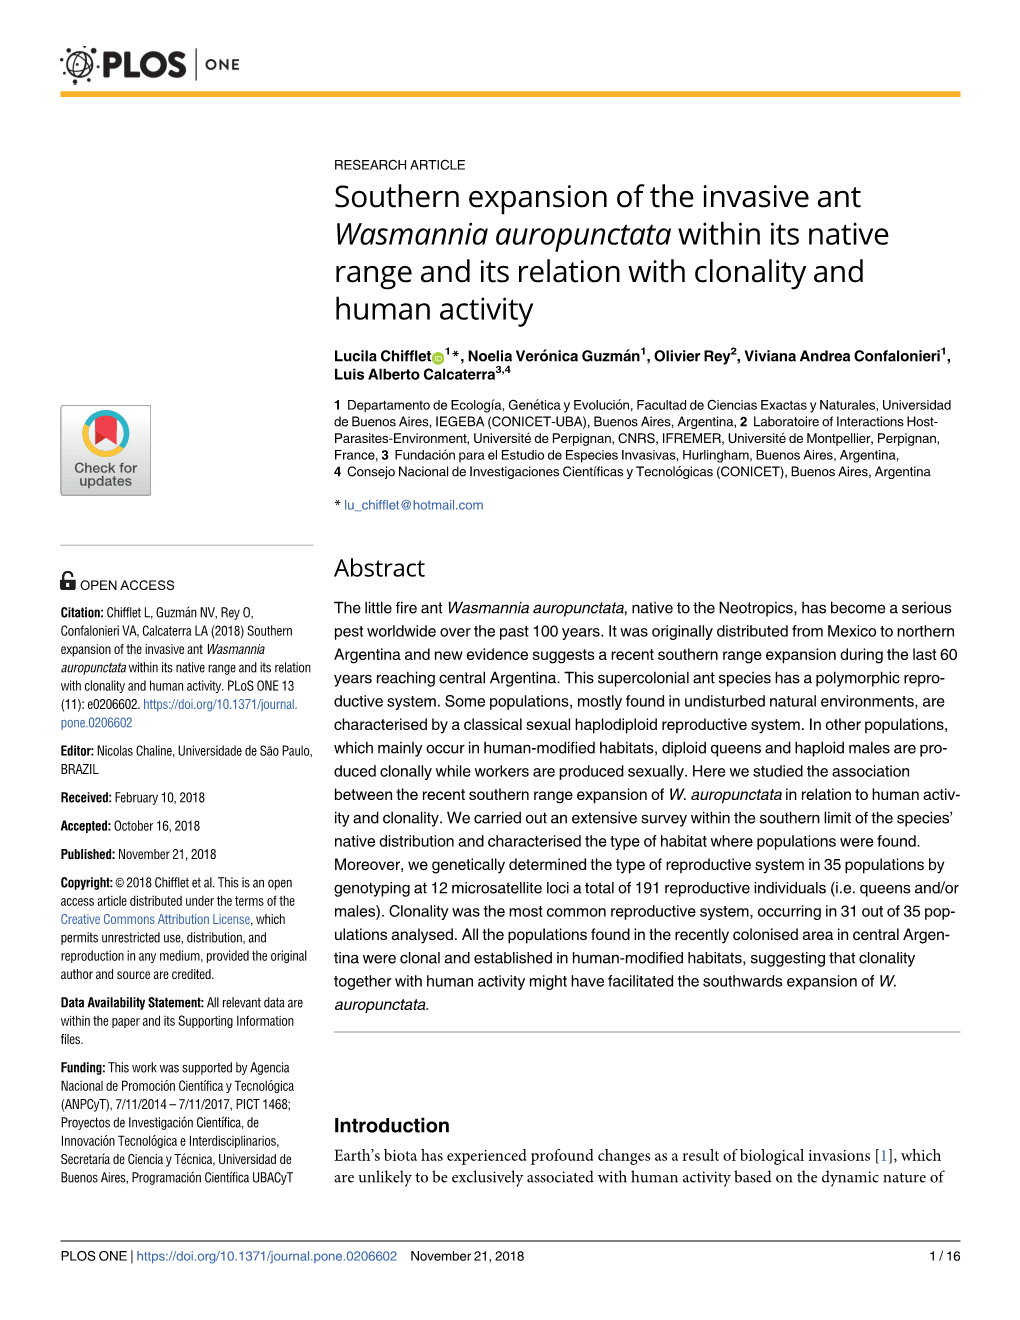 Southern Expansion of the Invasive Ant Wasmannia Auropunctata Within Its Native Range and Its Relation with Clonality and Human Activity